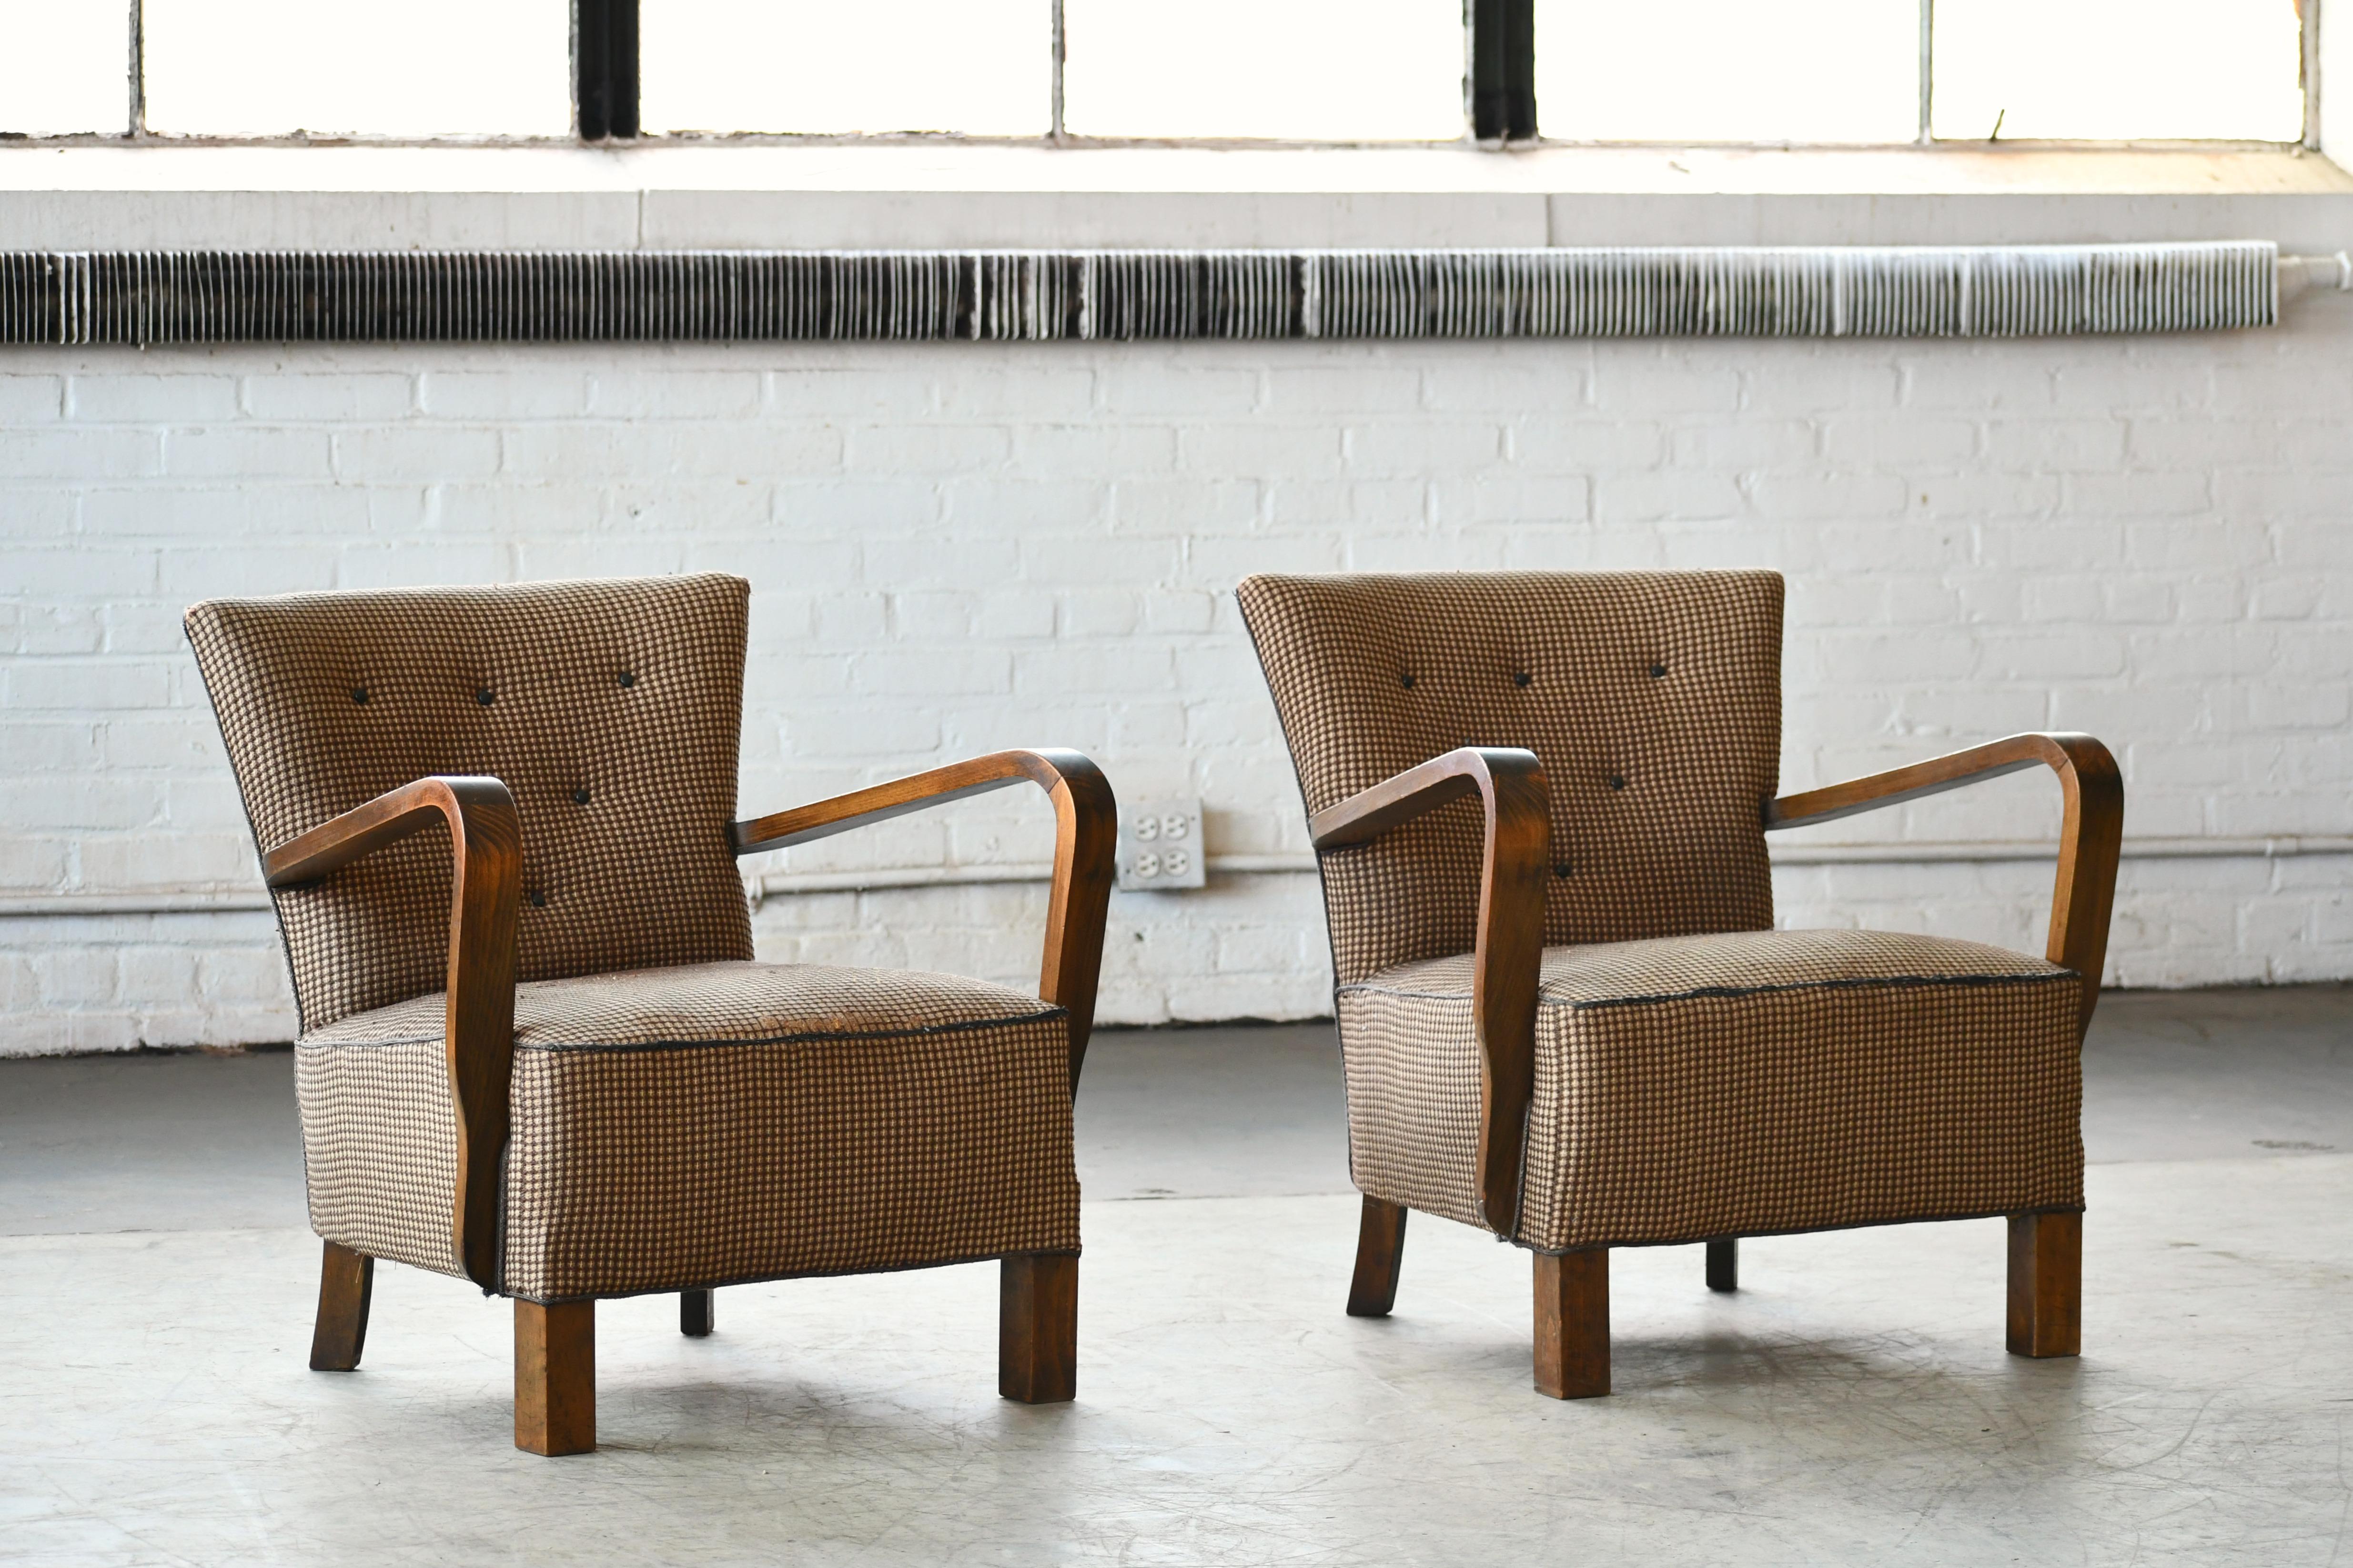 Superb pair of Danish late Art Deco early midcentury chairs from the early 1940s with spring cushions and beautiful open armrests and legs carved in solid mahogany with great grain and patina. We just love the simple yet very refined elegant and fun